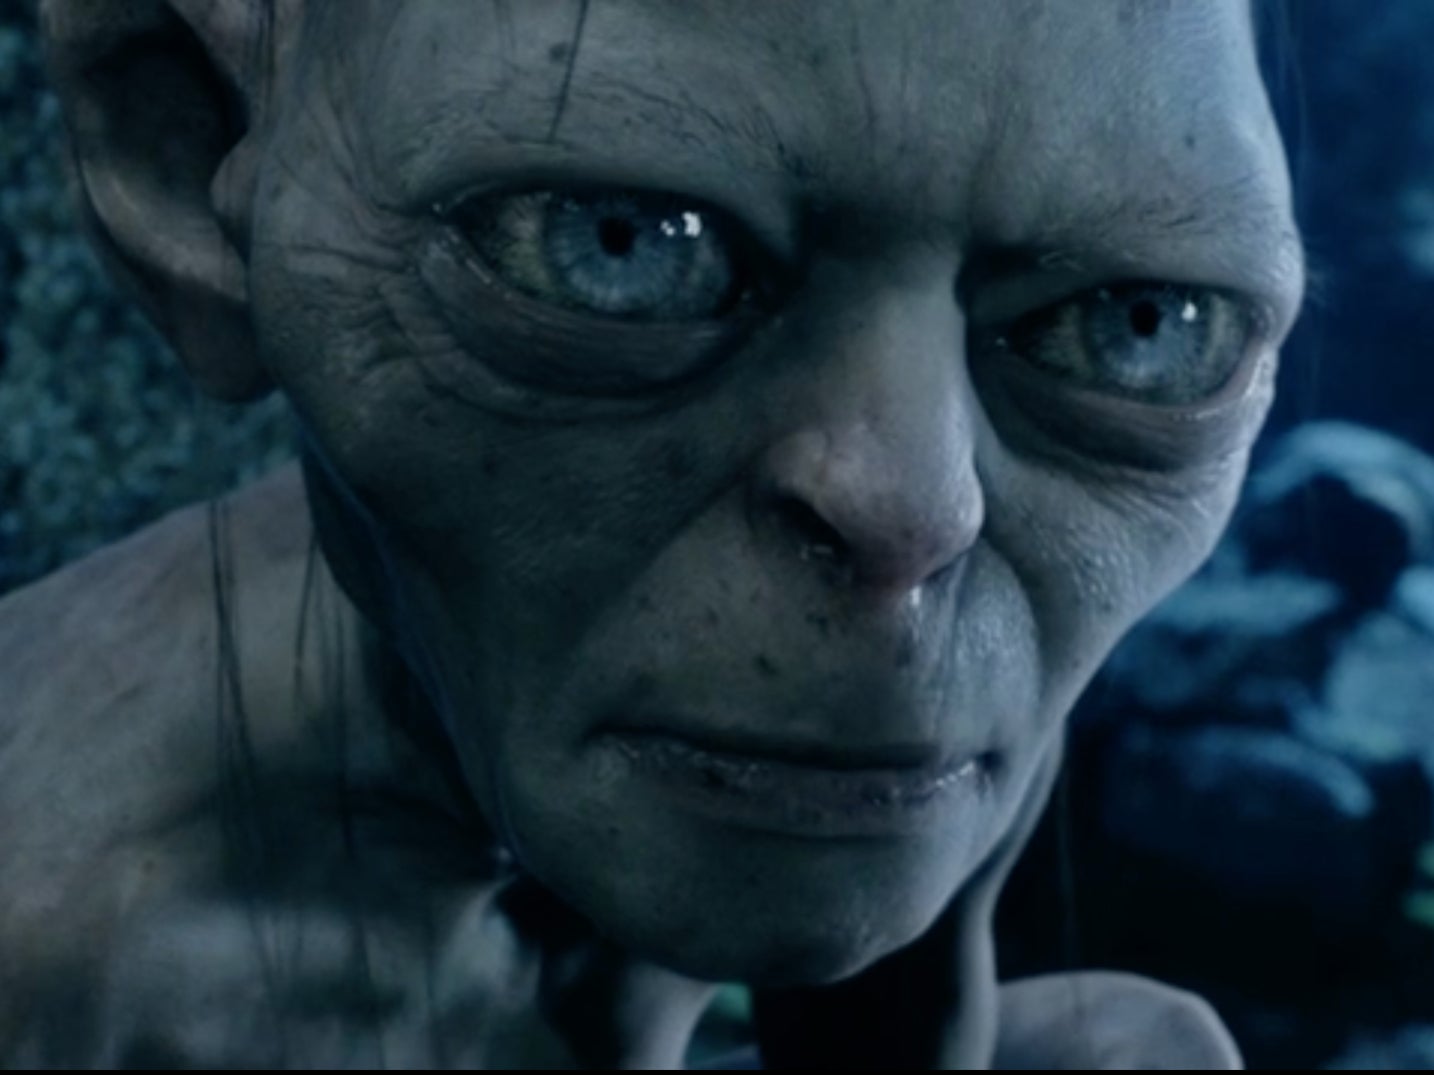 Gollum is taking centre stage in a new ‘Lord of the Rings’ film